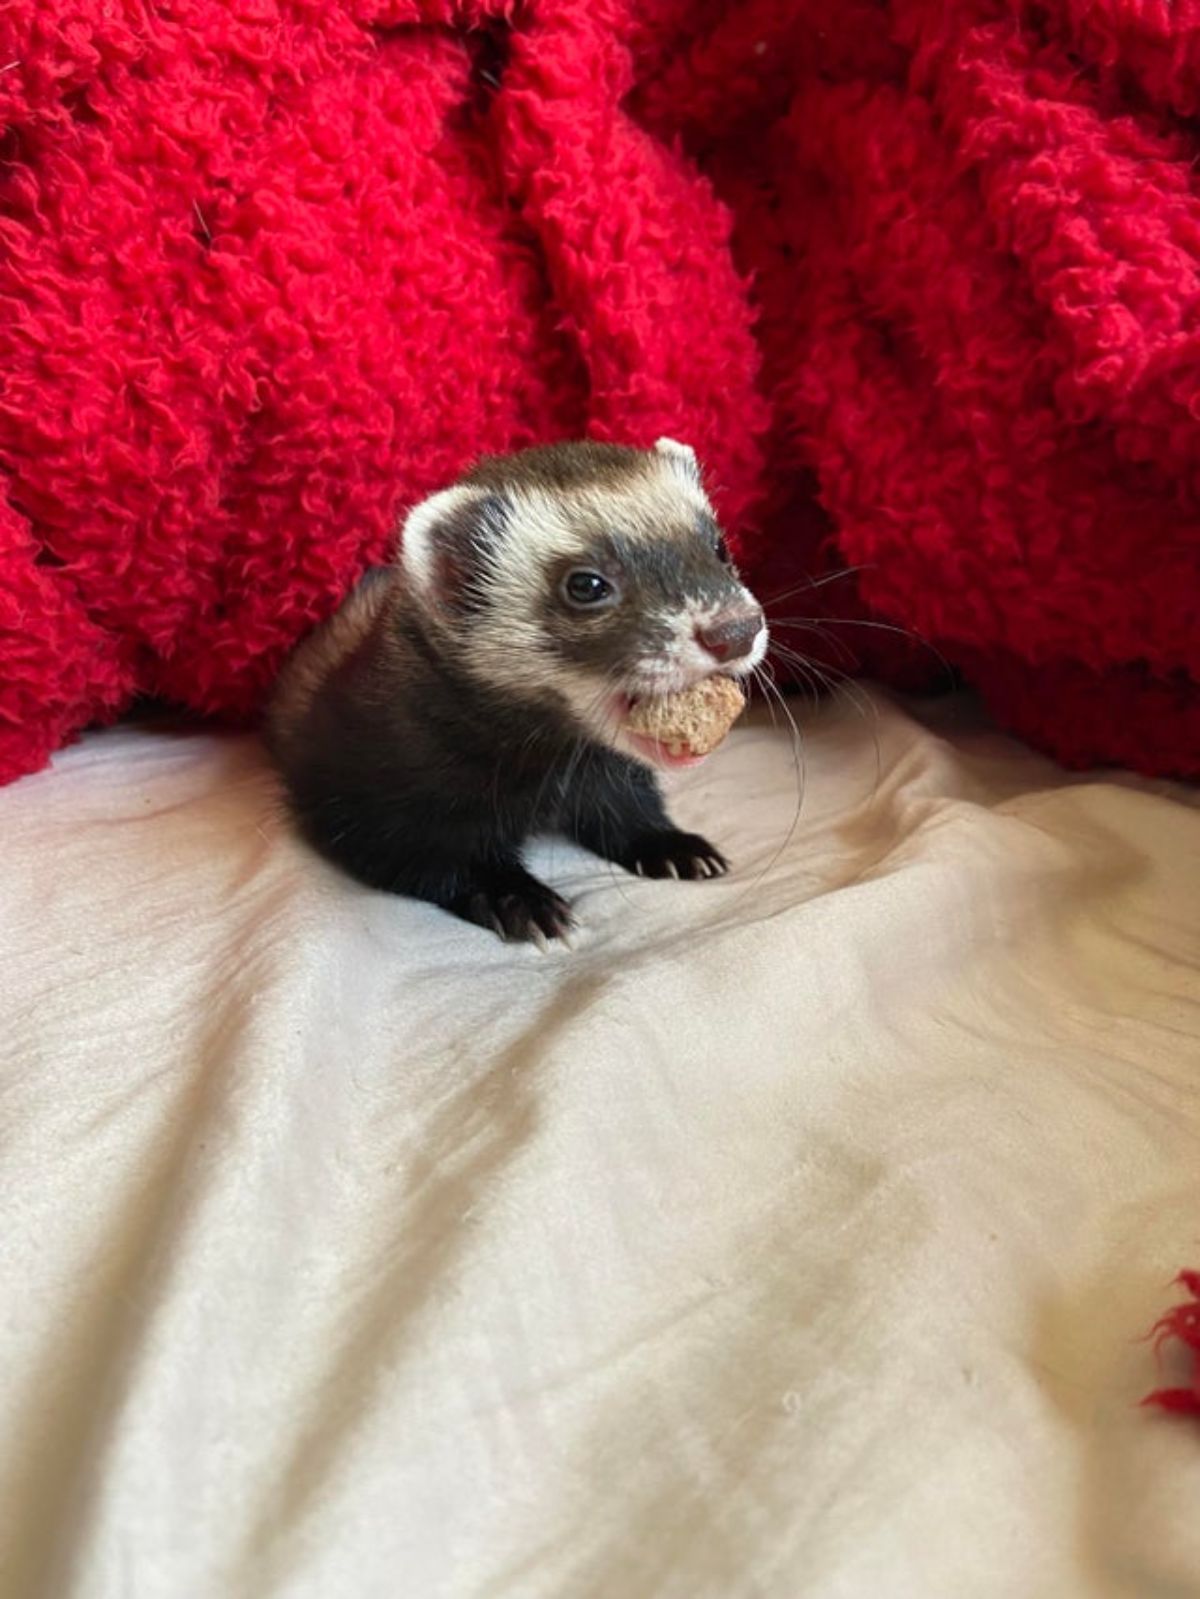 black and white ferret holding brown food in its mouth standing on beige bedsheet and under a red blanket